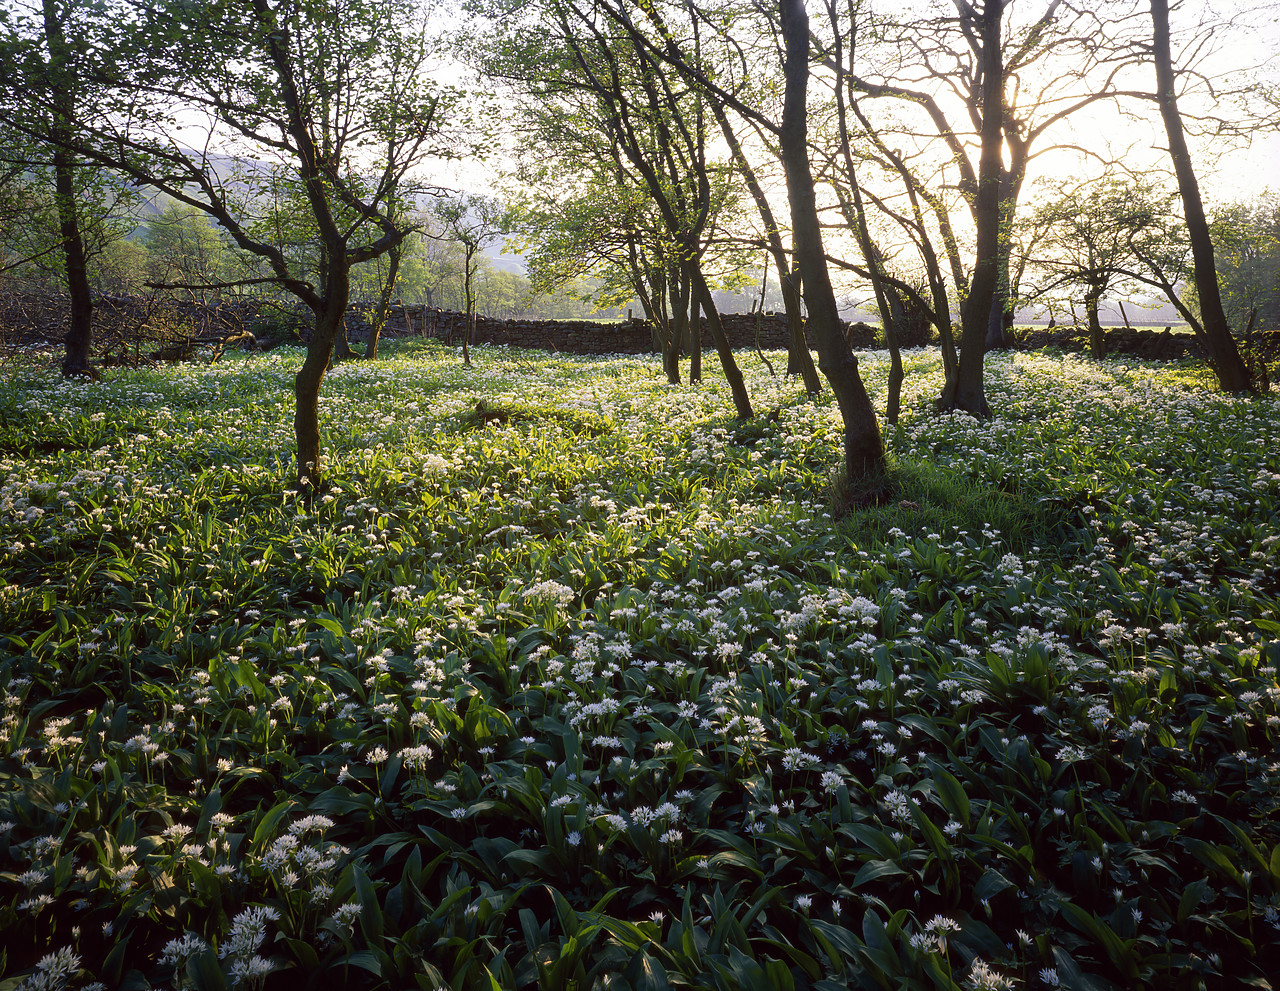 #980076-1 - Afternoon Light Across Wild Garlic, Swaledale, North Yorkshire, England